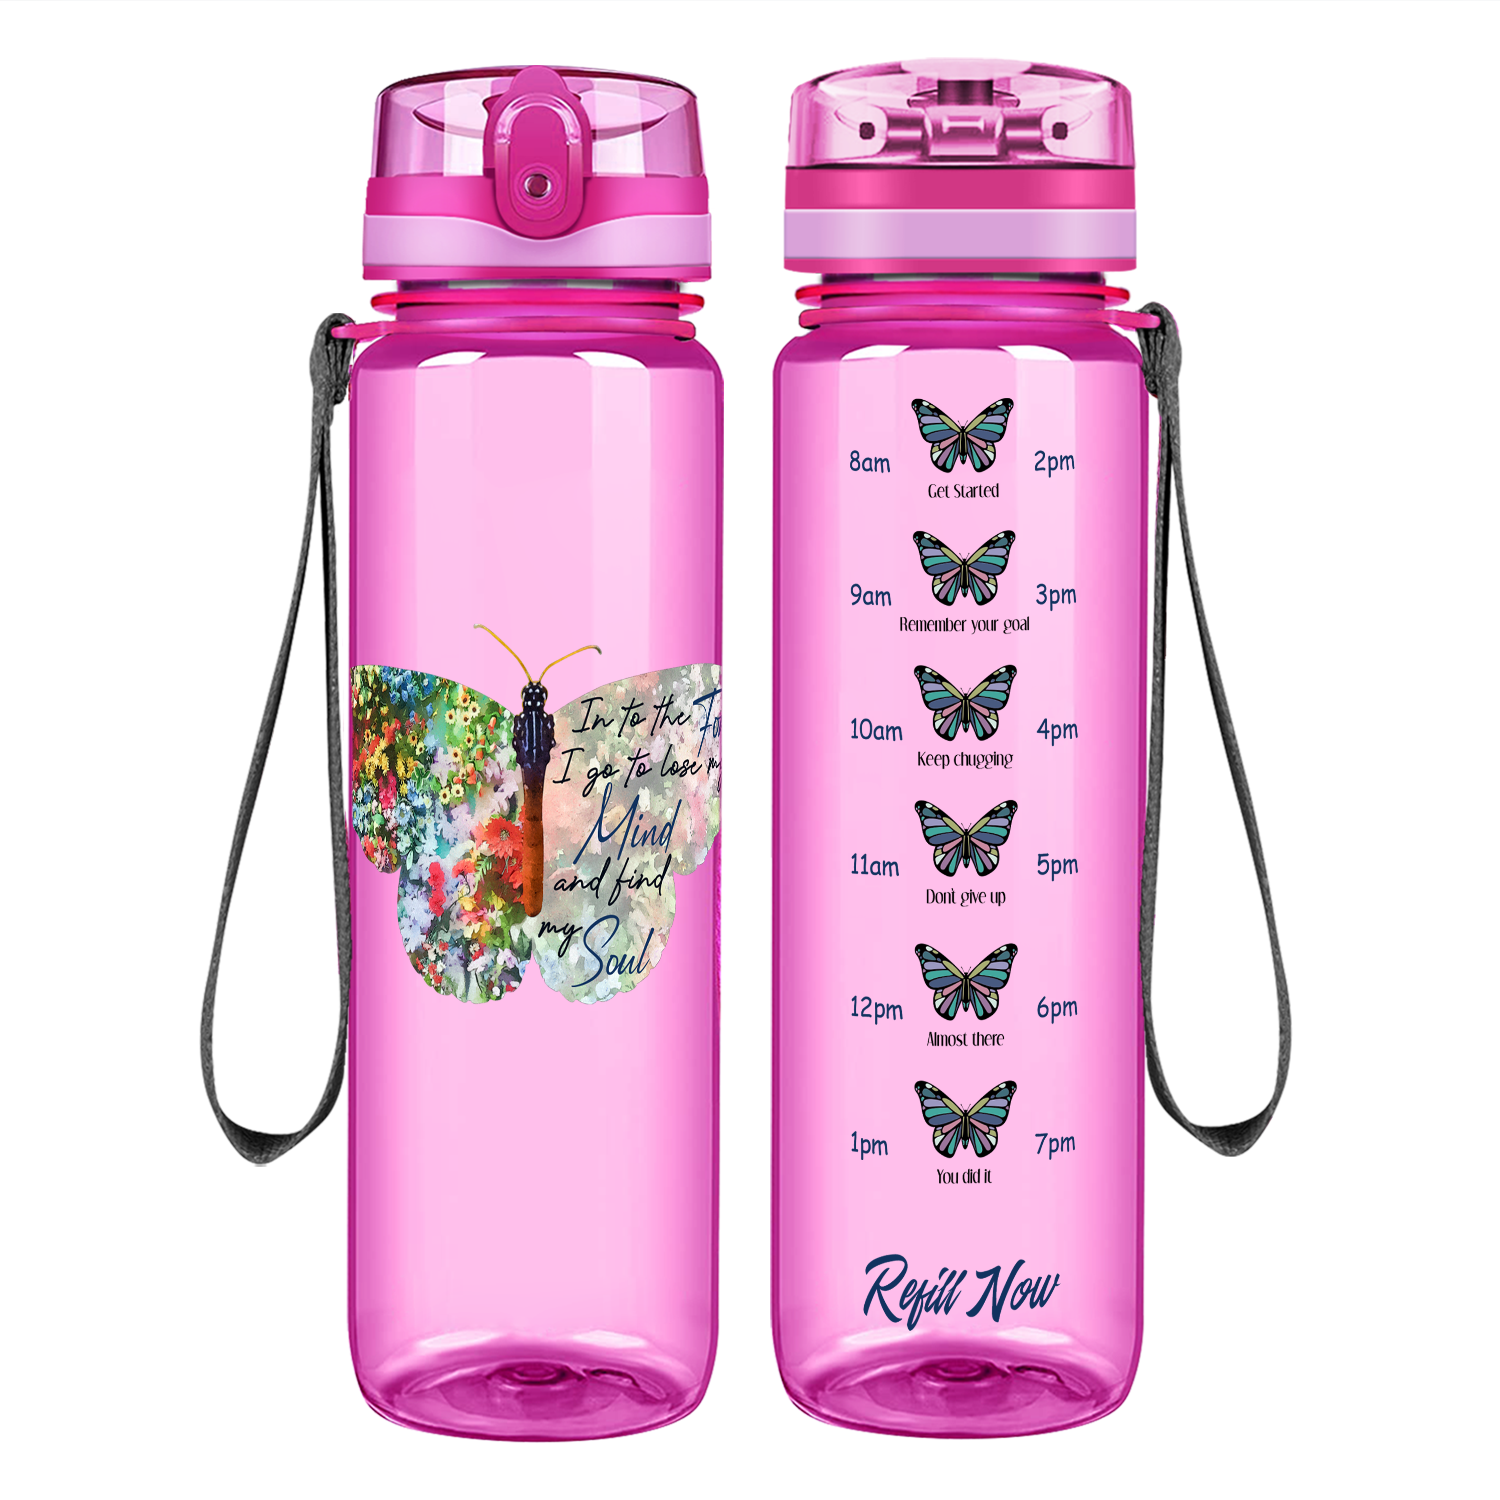 Mind and Soul Butterfly on 32 oz Motivational Tracking Water Bottle